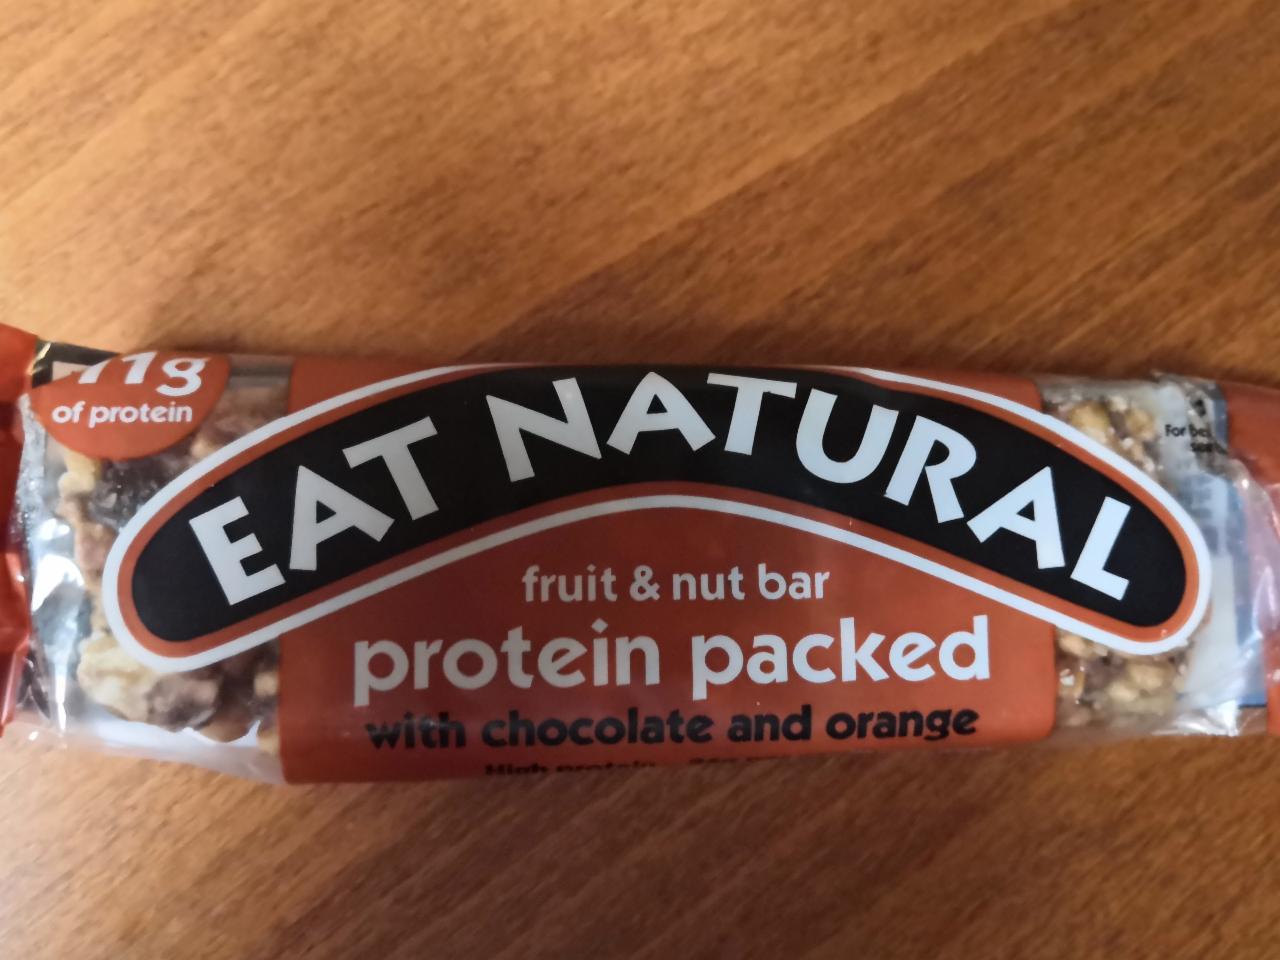 Fotografie - Eat natural fruit&nut bar protein packed with chocolate and orange